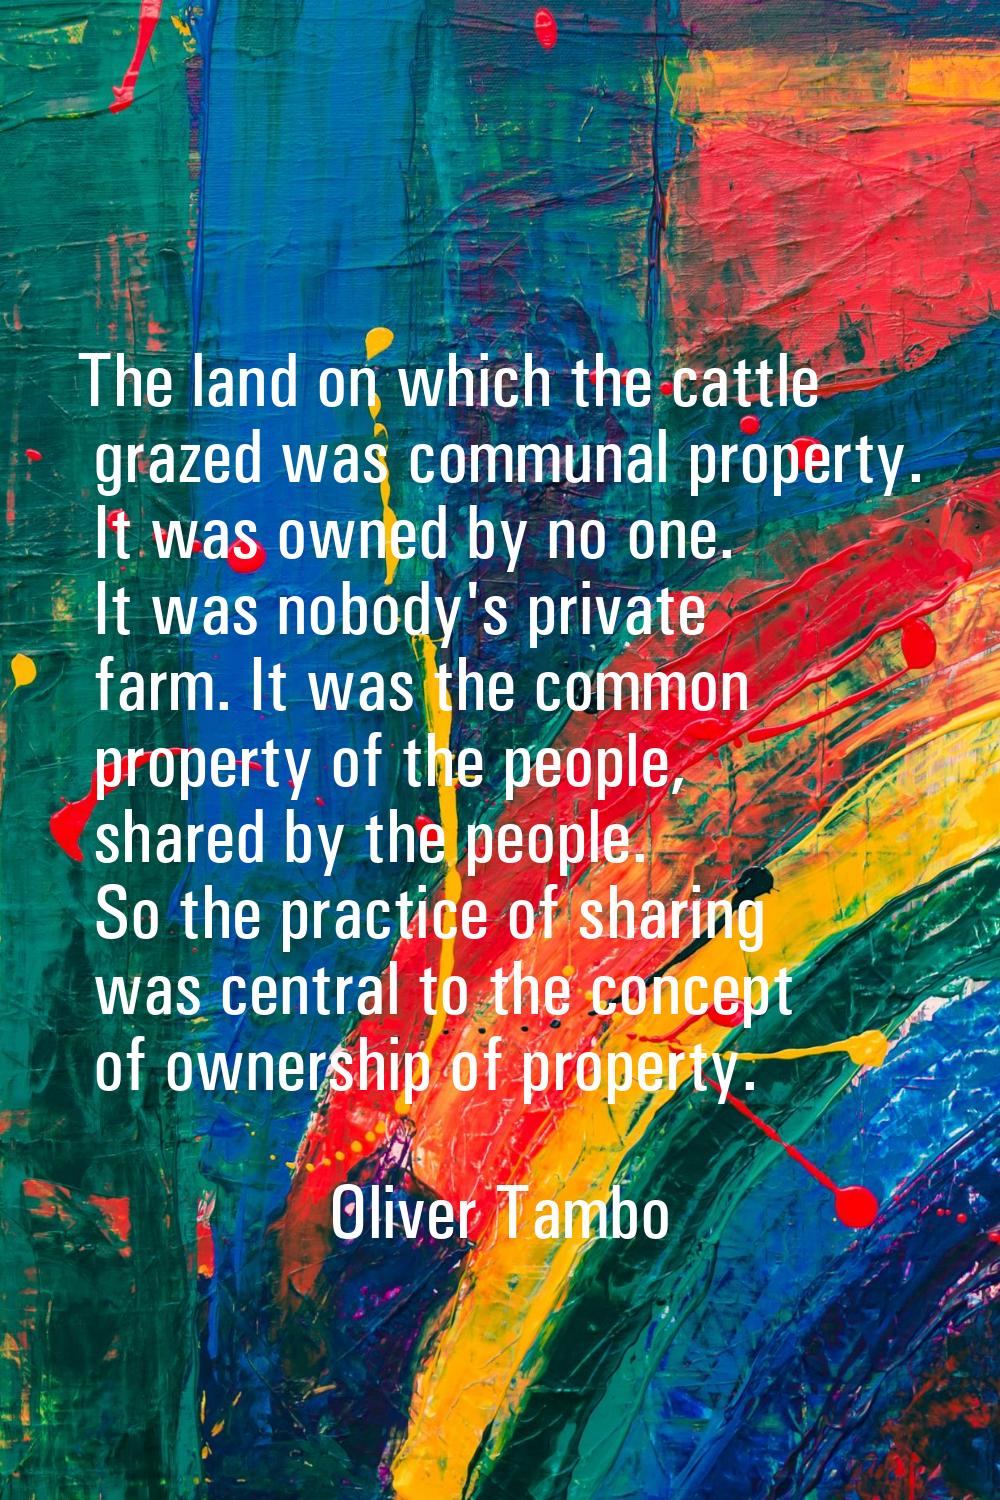 The land on which the cattle grazed was communal property. It was owned by no one. It was nobody's 